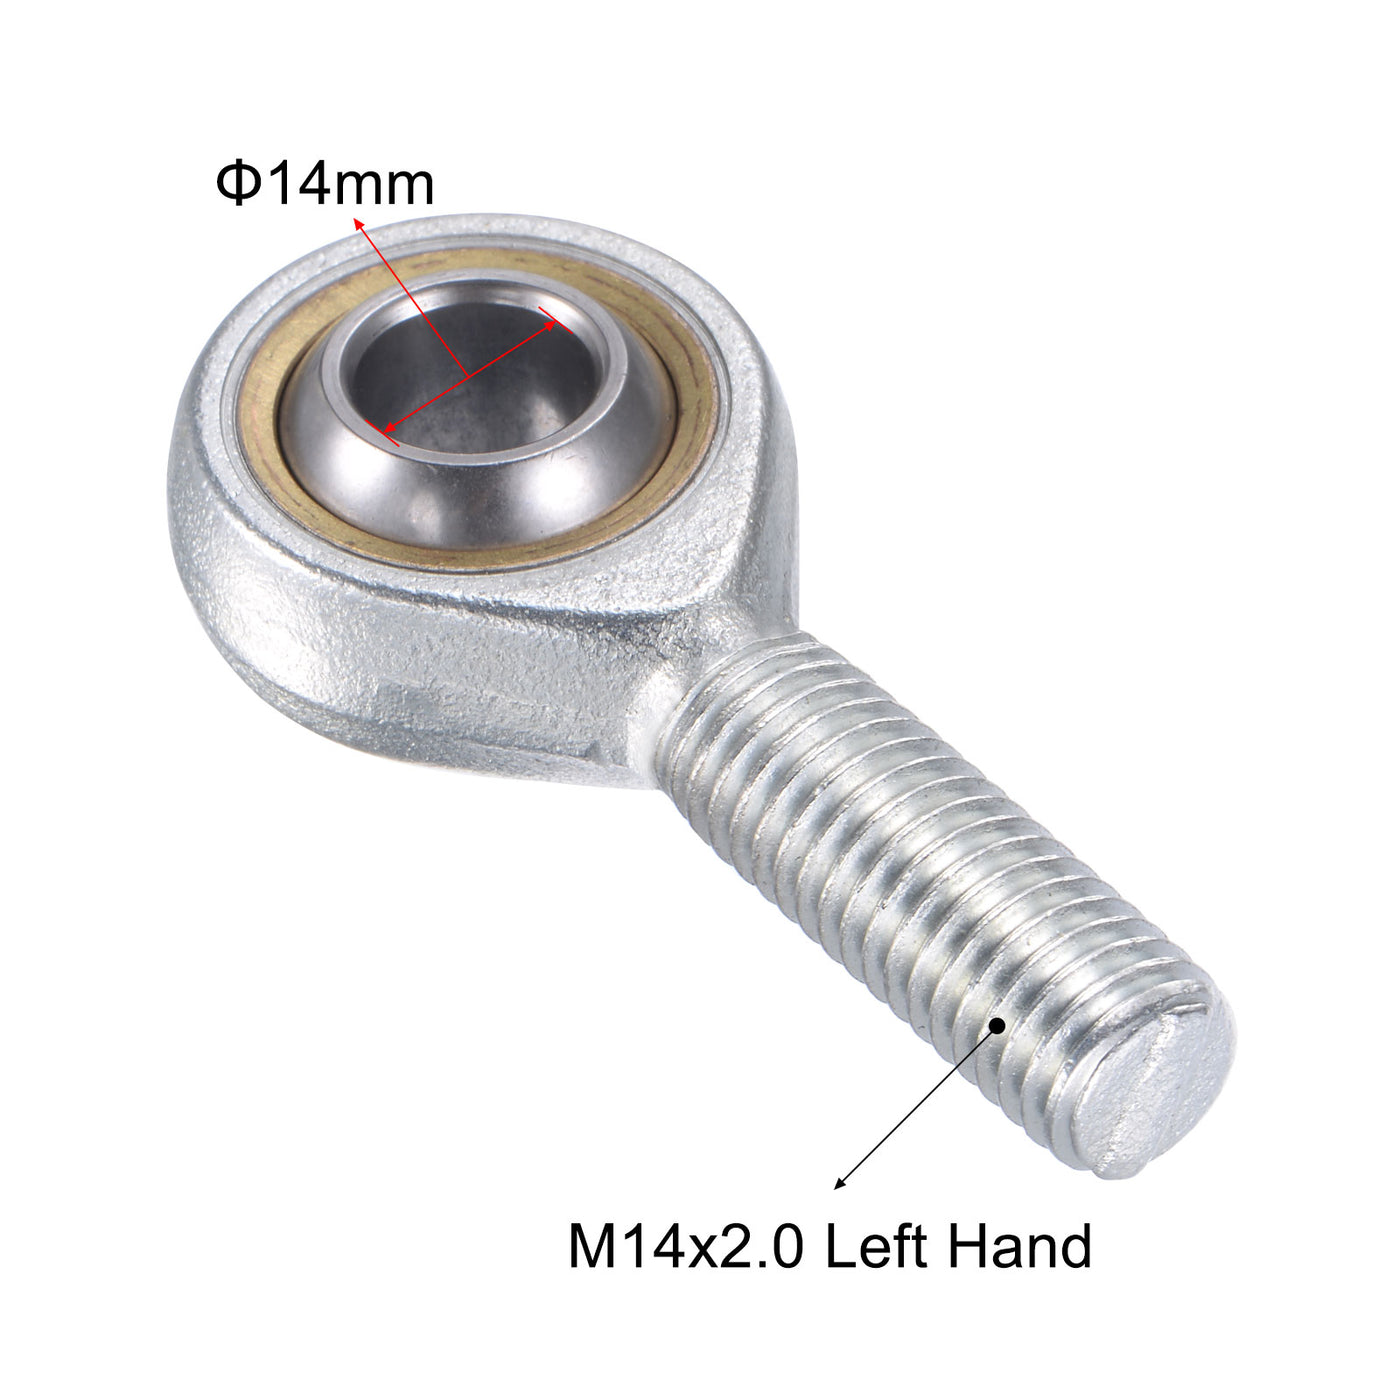 uxcell Uxcell SA14TK POSA14 Rod End Bearing 14mm Bore M14x2.0 Left Hand Male Thread